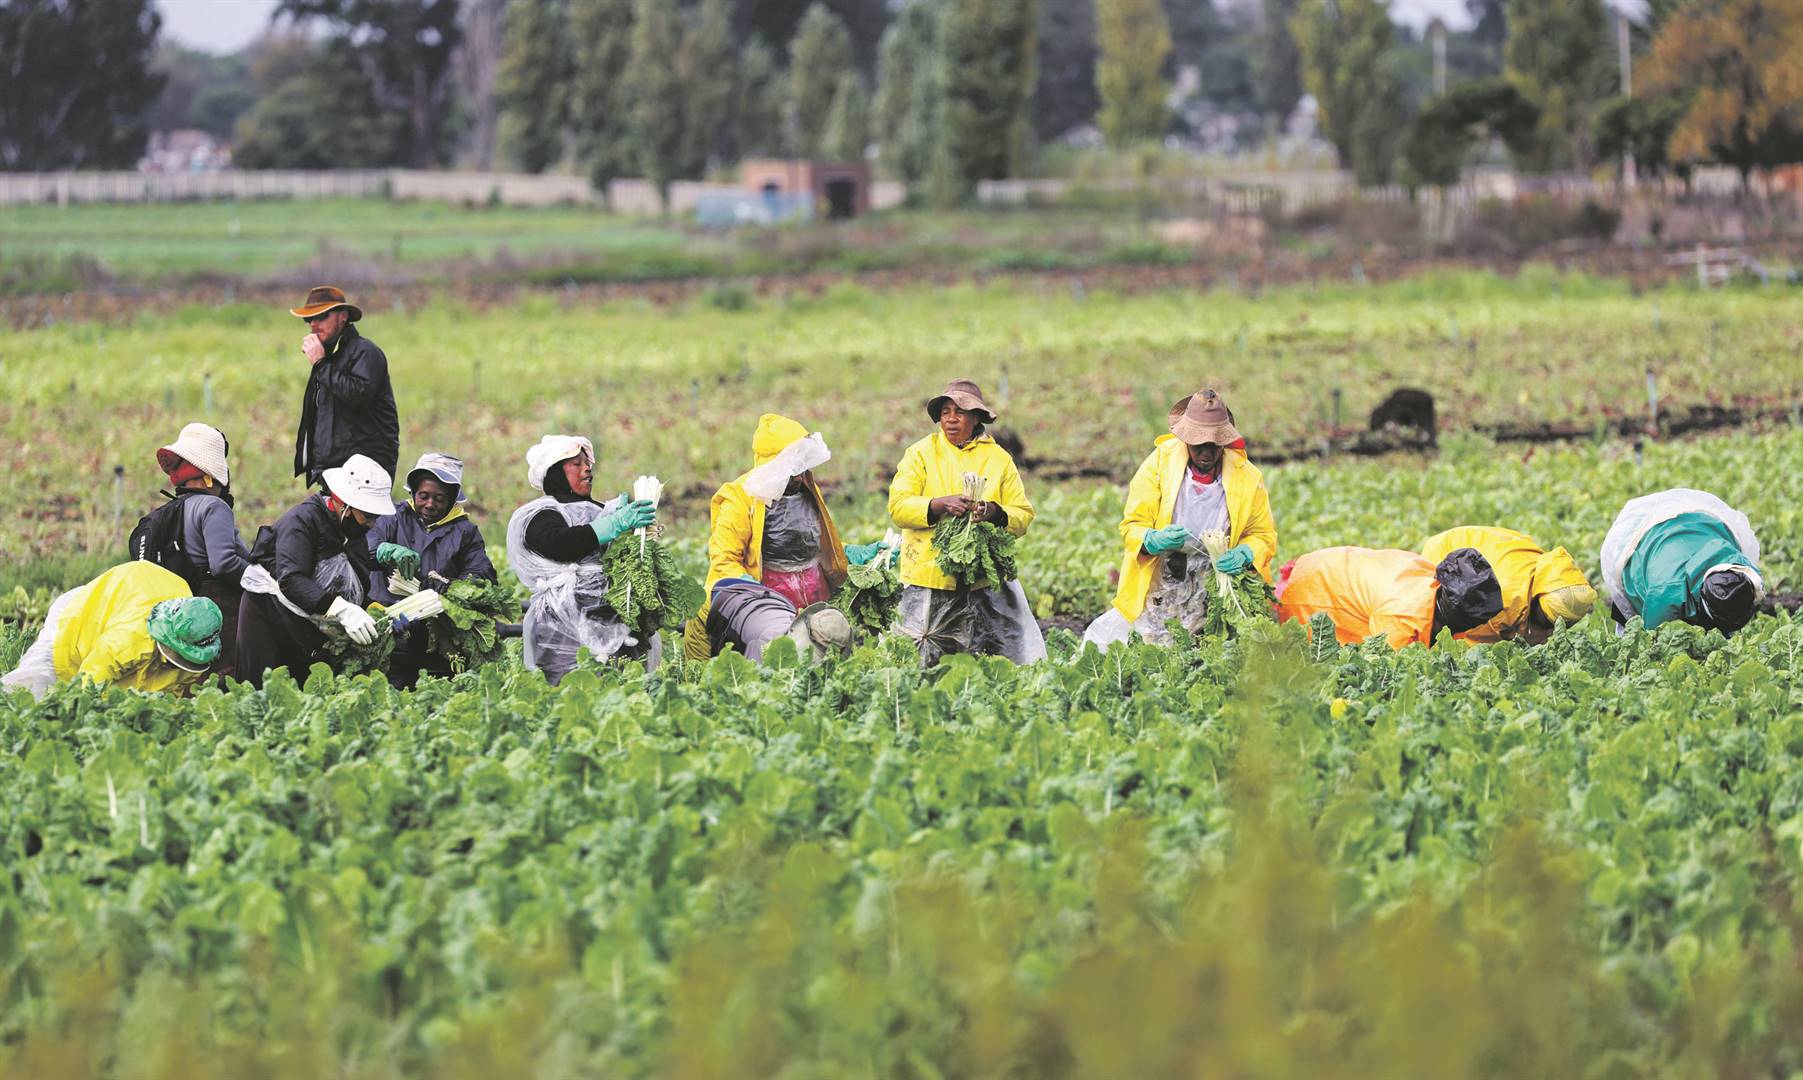  Workers harvest spinach at a farm in Klippoortjie outside Johannesburg. Eskom’s blackouts have put farmers under pressure Photo: Reuters 